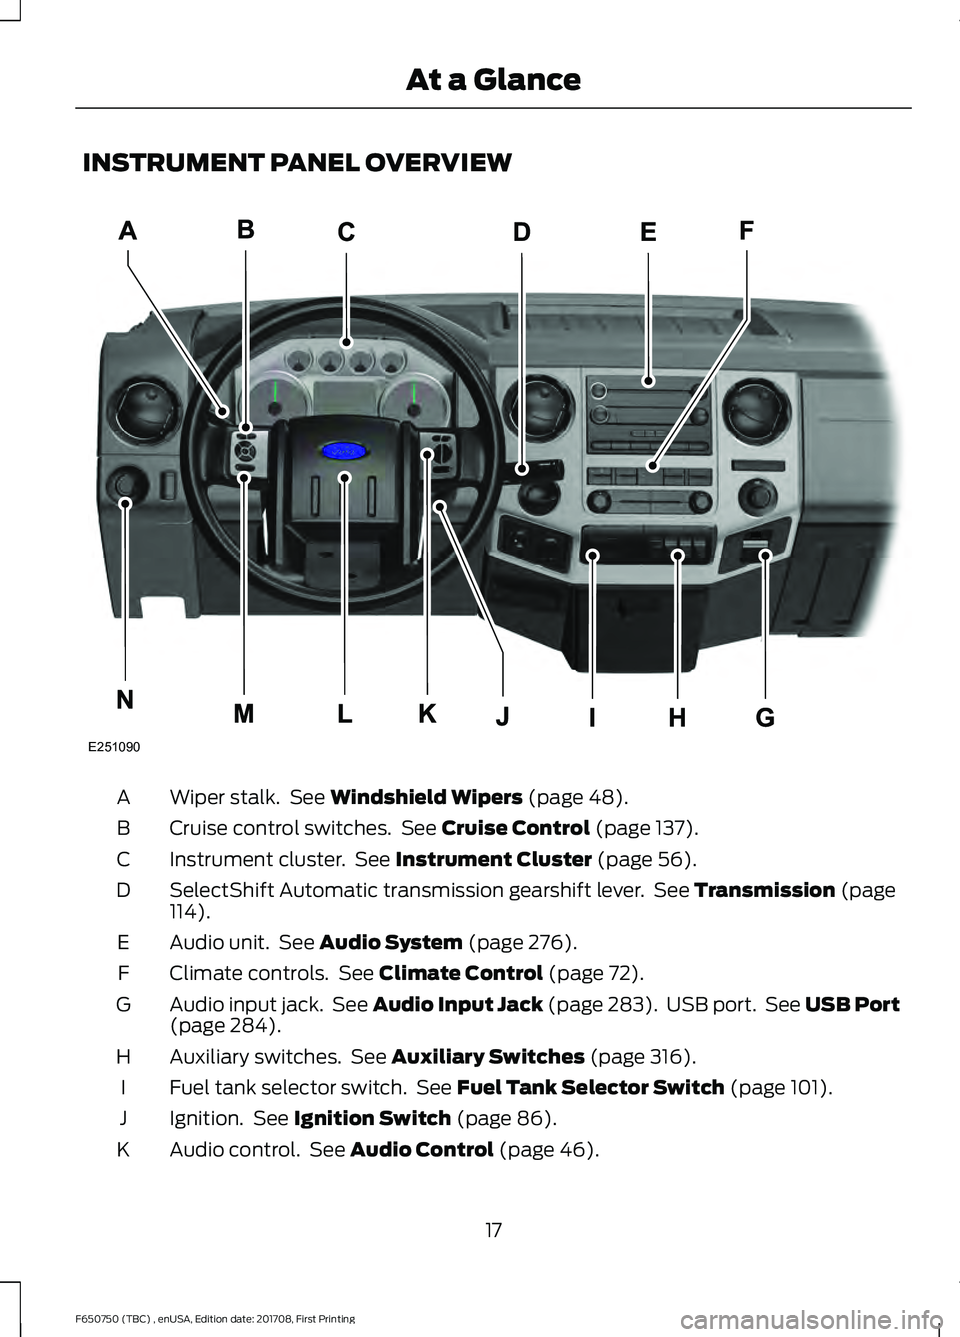 FORD F-650/750 2018  Owners Manual INSTRUMENT PANEL OVERVIEW
Wiper stalk.  See Windshield Wipers (page 48).
A
Cruise control switches.  See 
Cruise Control (page 137).
B
Instrument cluster.  See 
Instrument Cluster (page 56).
C
SelectS